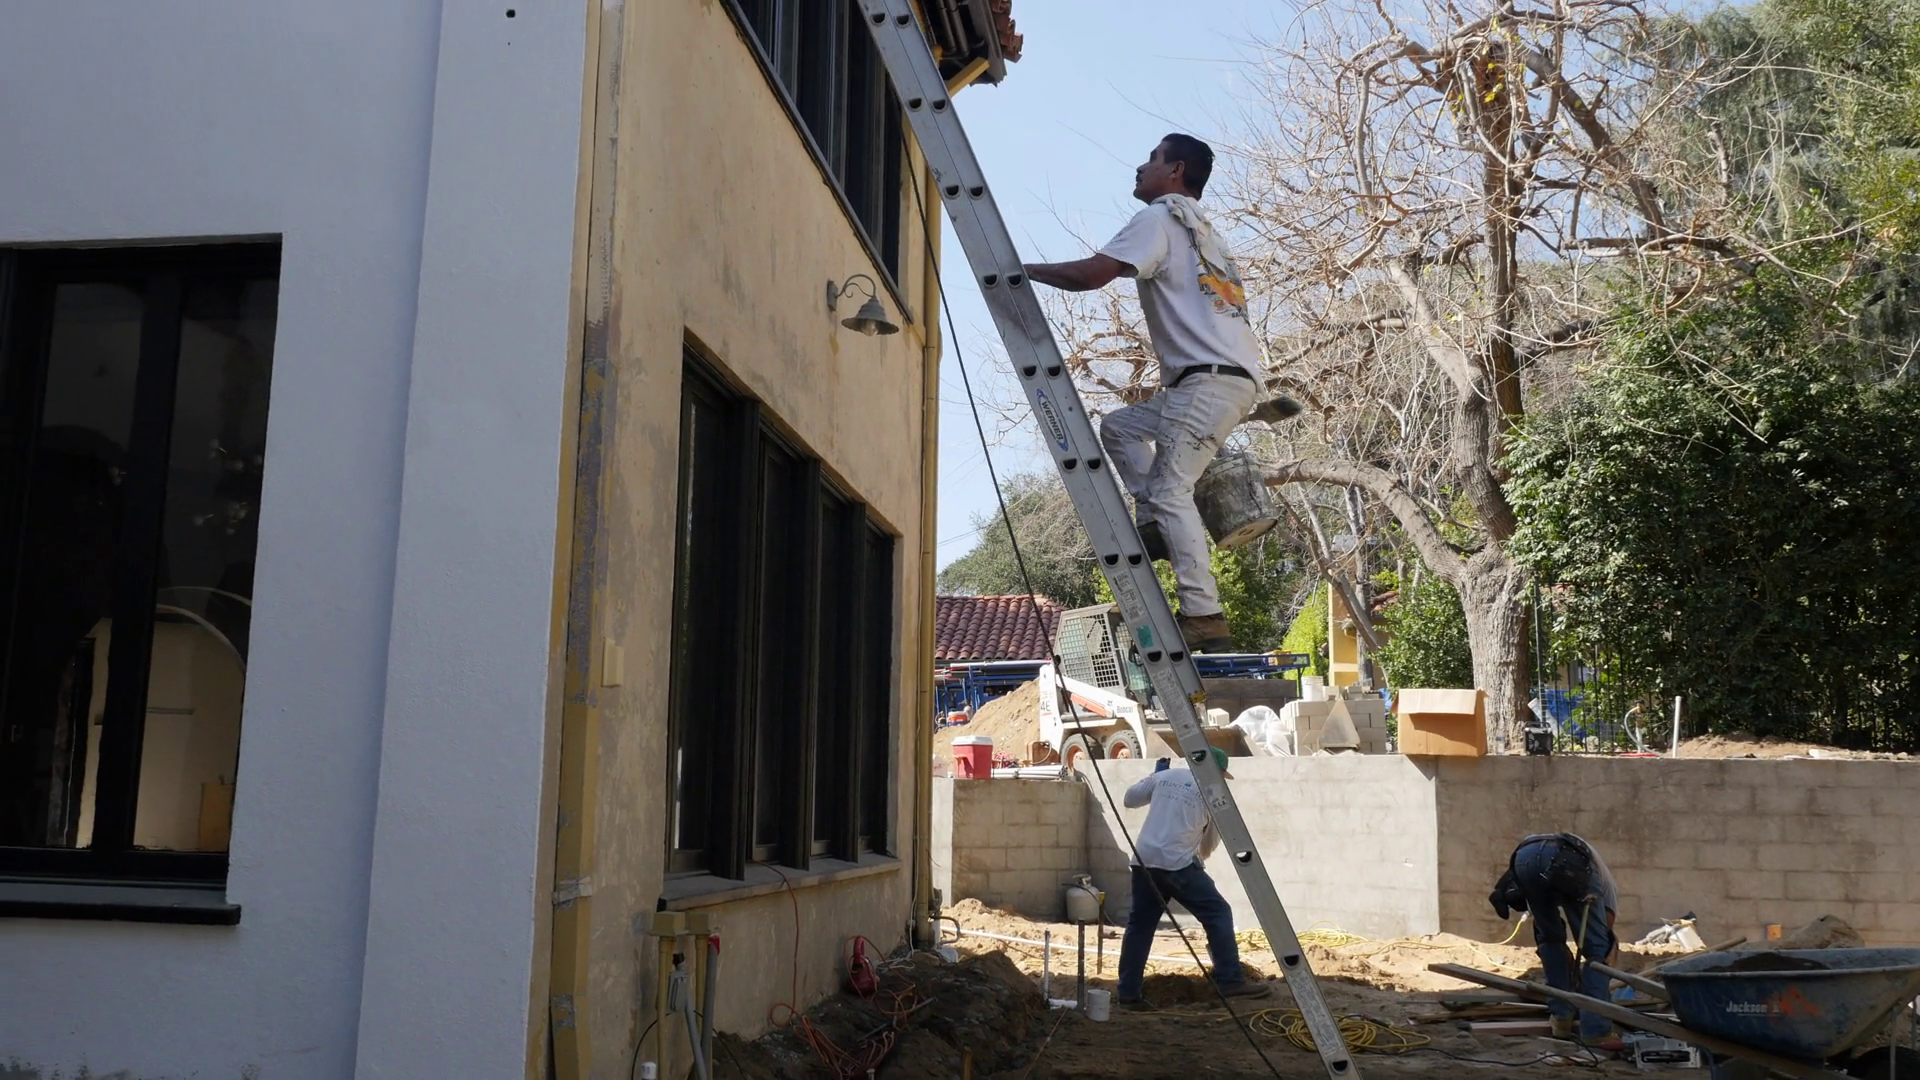 House Painter Climbs Up Large Extension Ladder Stock Video Footage   Videoblocks - House Painter, Transparent background PNG HD thumbnail